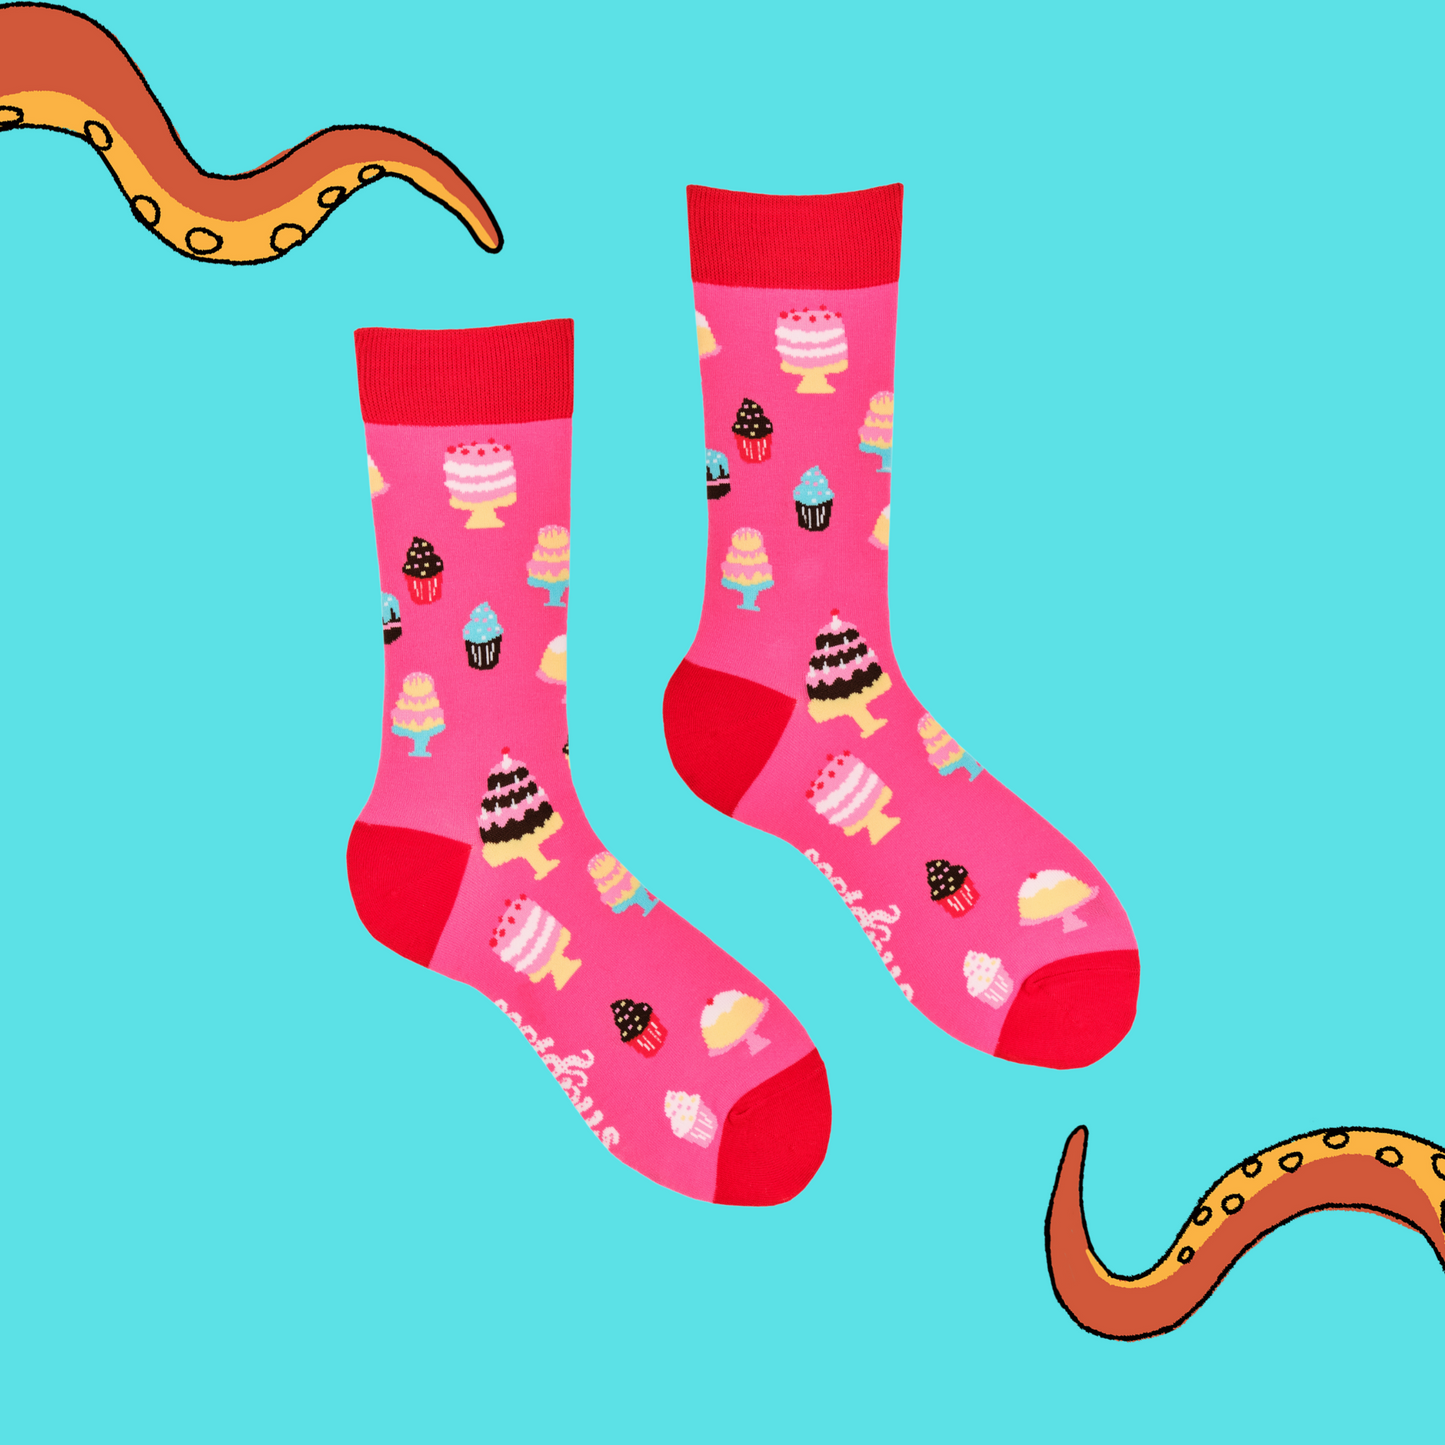 A pair of socks depicting cakes. Pink legs, red cuff, heel and toe.